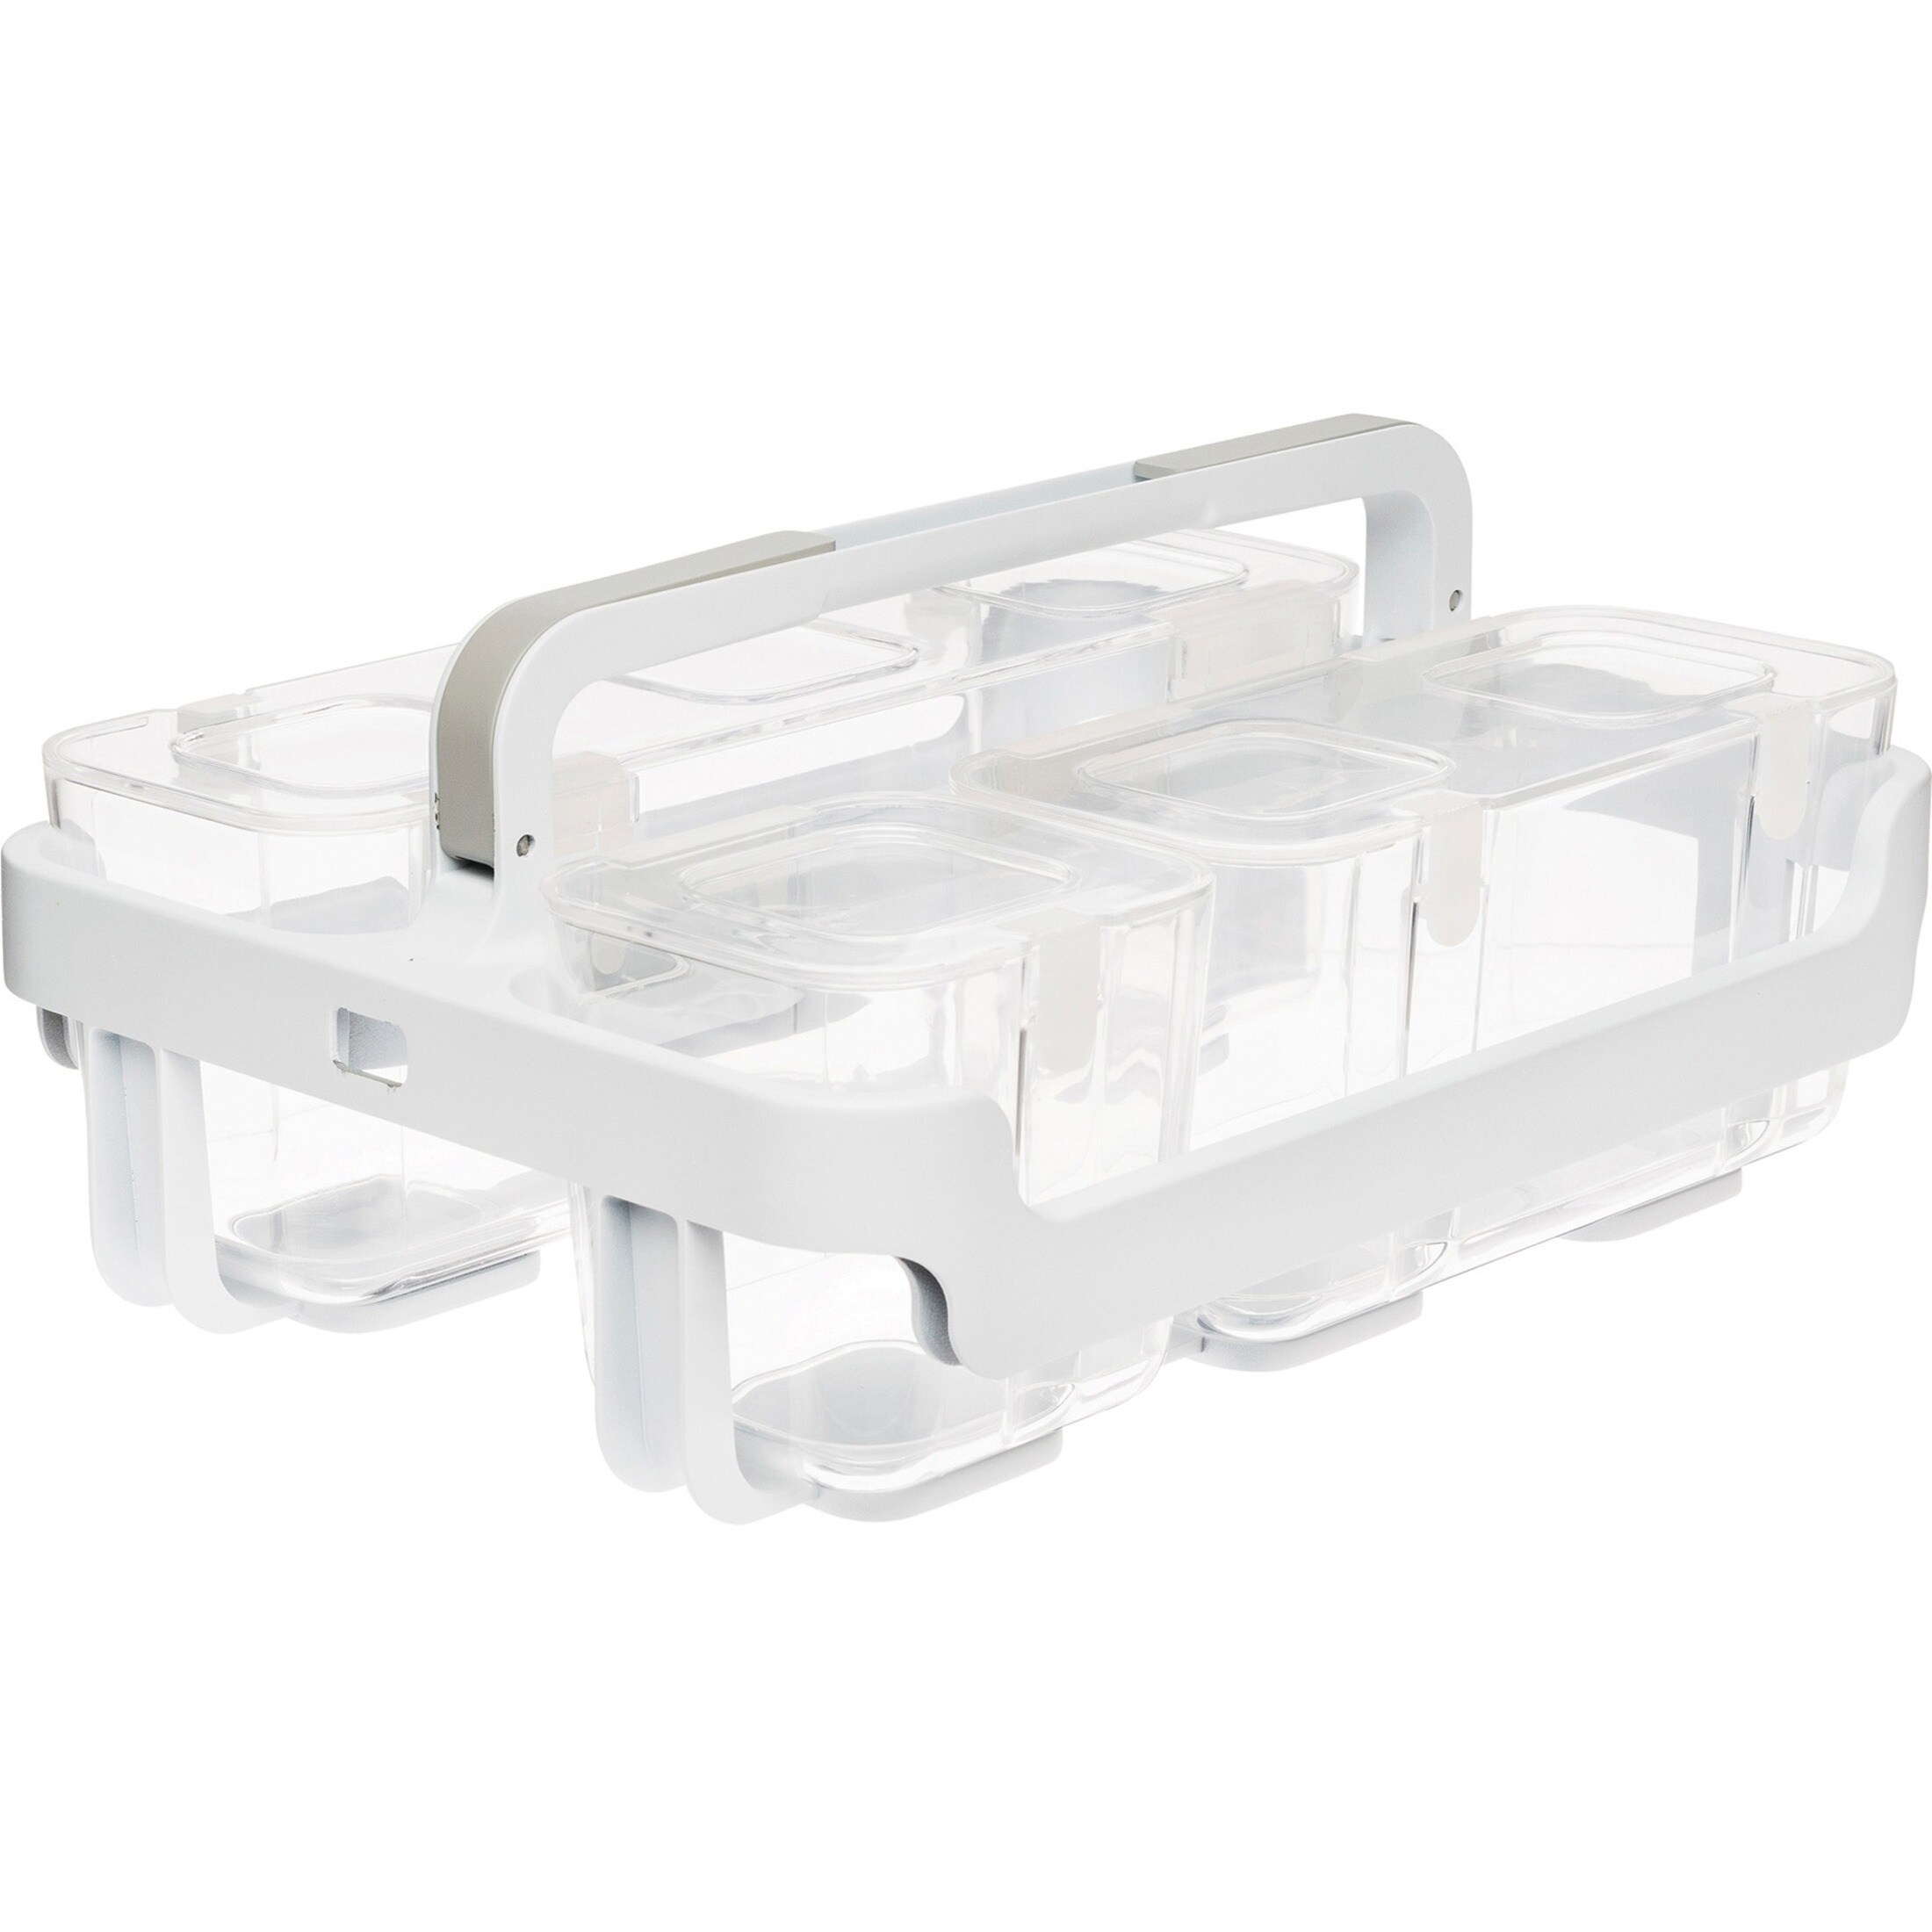 https://ak1.ostkcdn.com/images/products/is/images/direct/b339e5f98e12d6ea0772ddae443bf338364fa5d2/Deflecto-Stackable-Caddy-Organizer.jpg